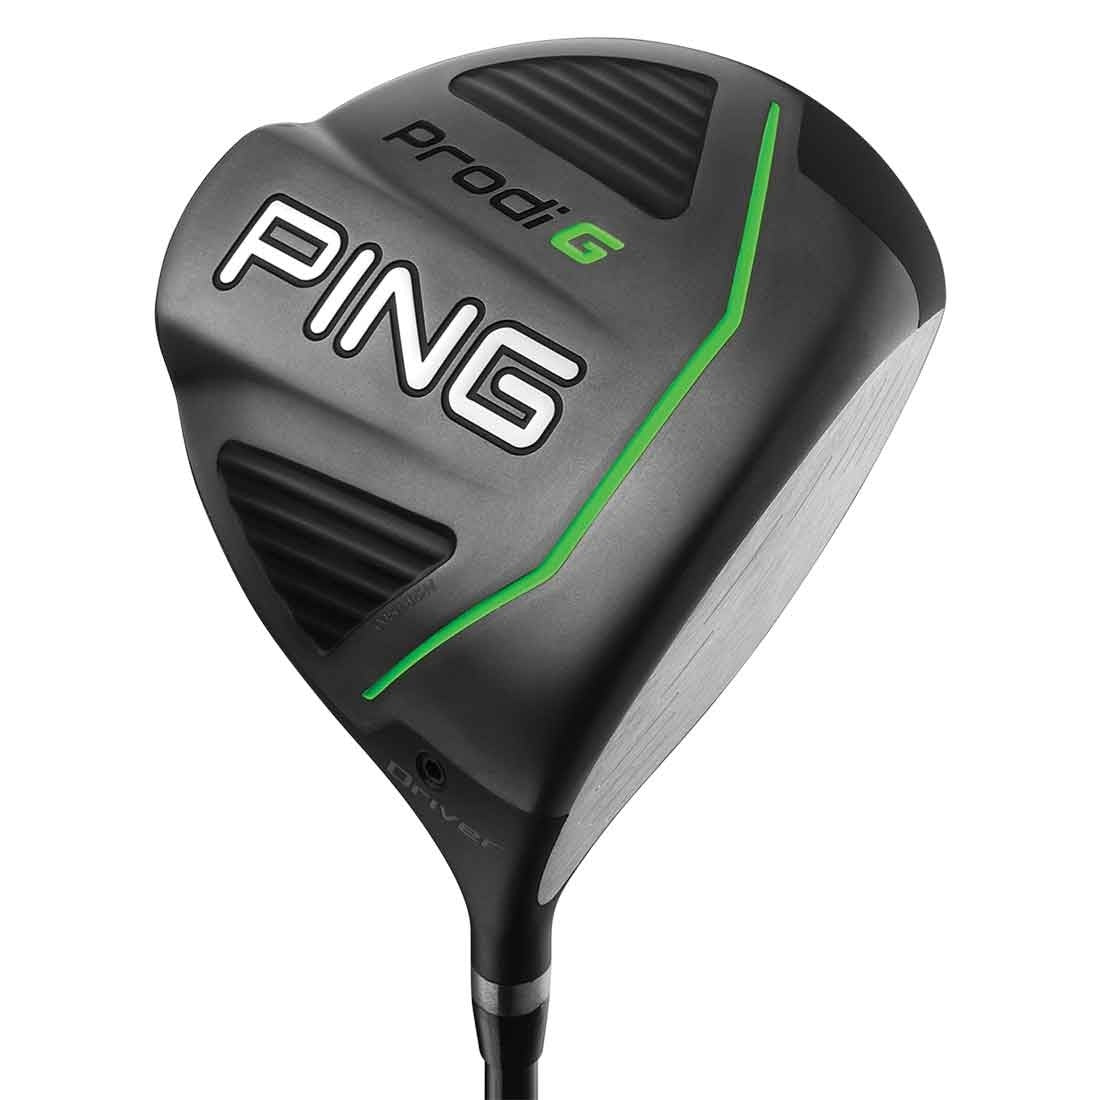 PING Golf Equipment and Accessories | Club 14 Golf